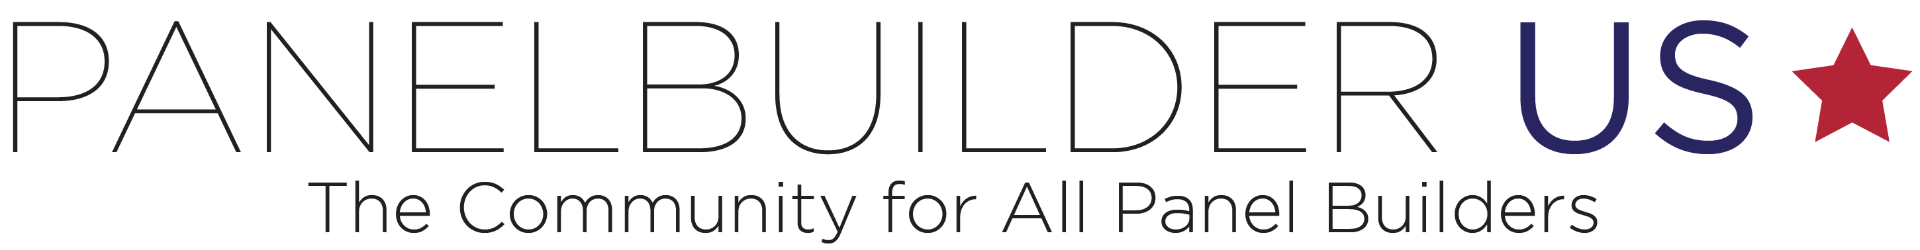 Panel Builder US, the community for all panel builders